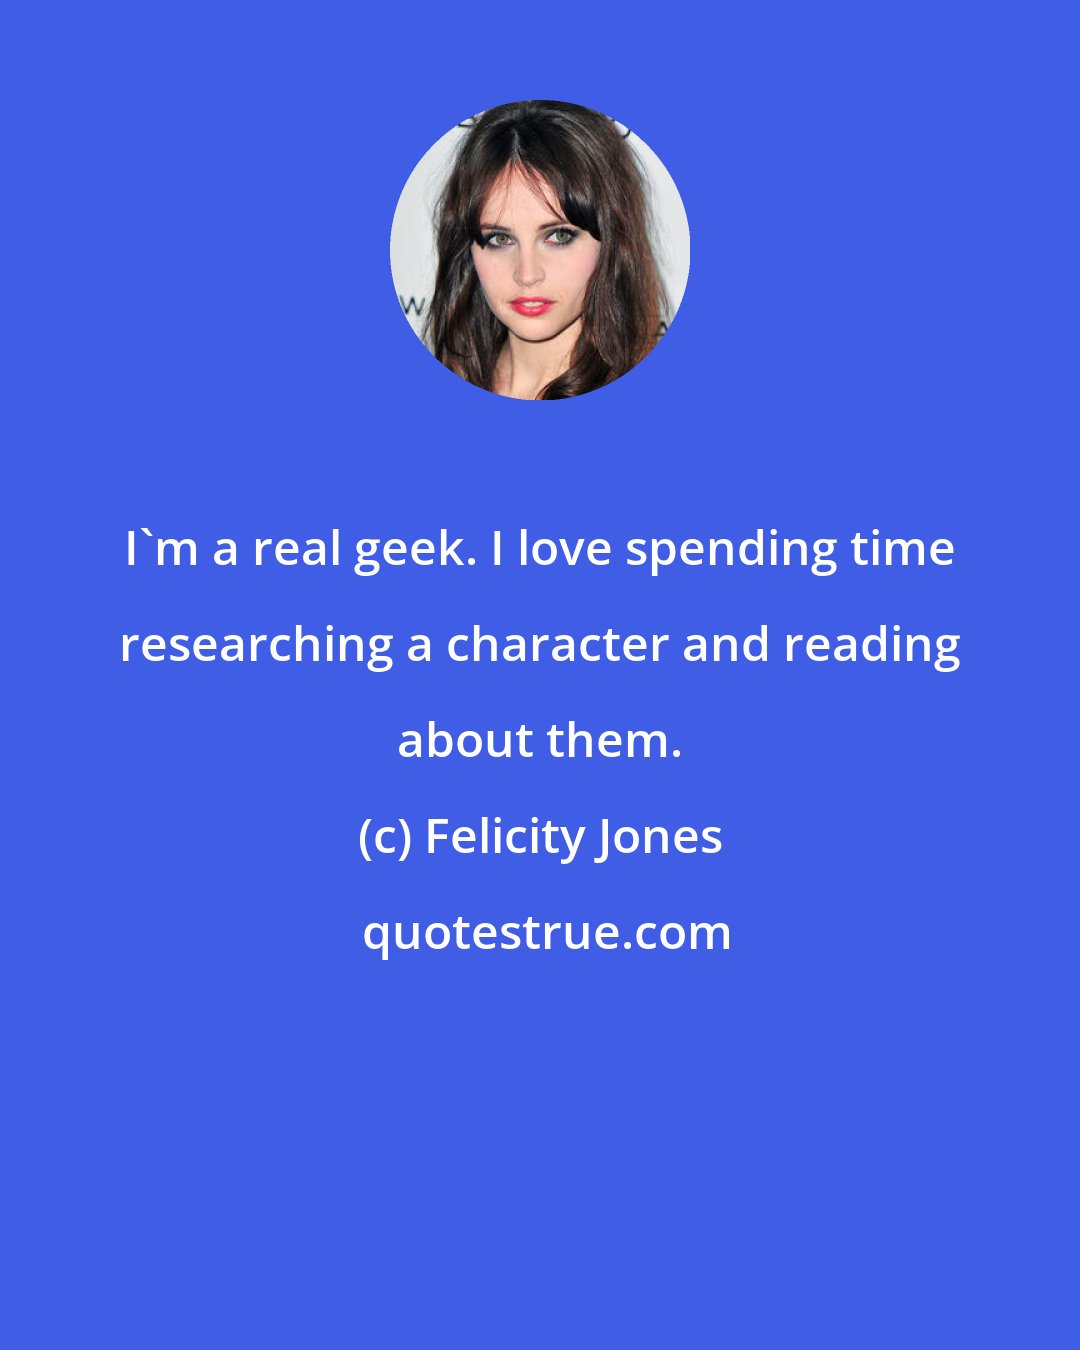 Felicity Jones: I'm a real geek. I love spending time researching a character and reading about them.